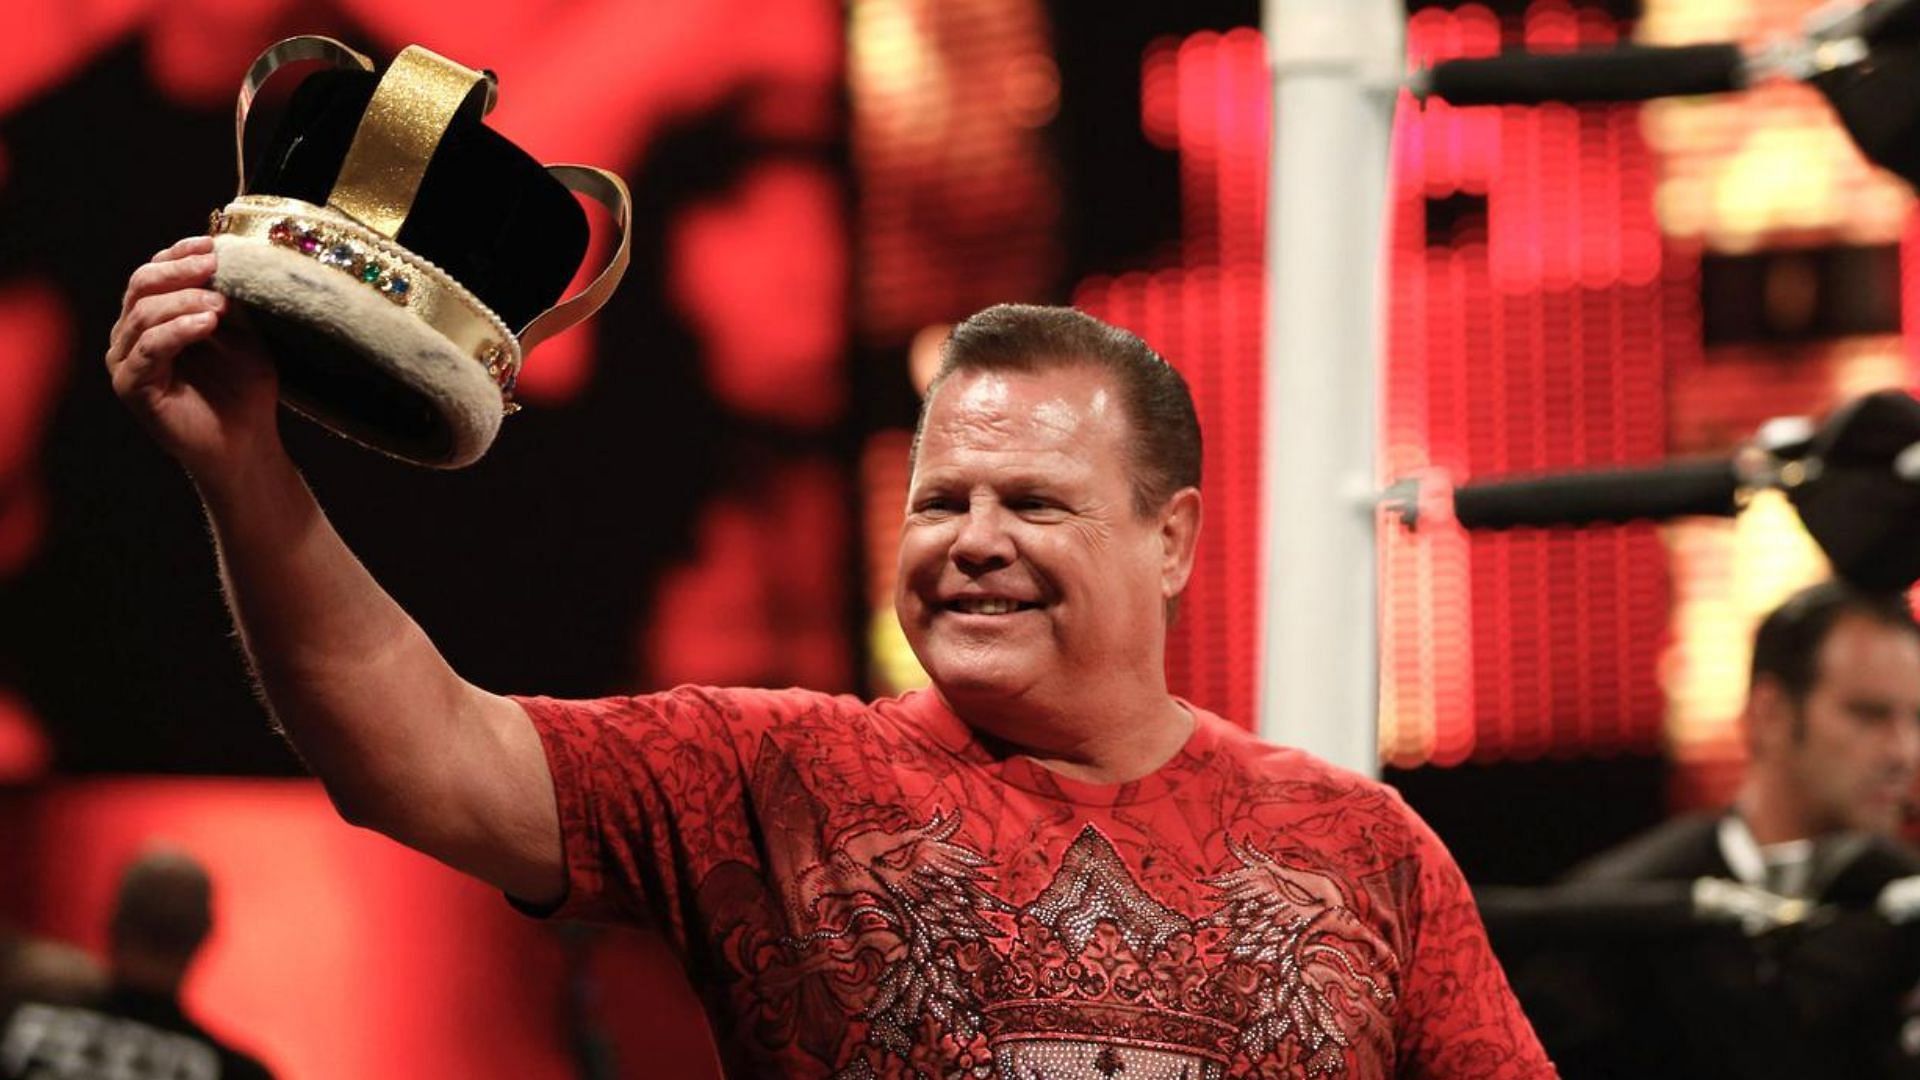 WWE legend Jerry Lawler suffered a medical issue today.